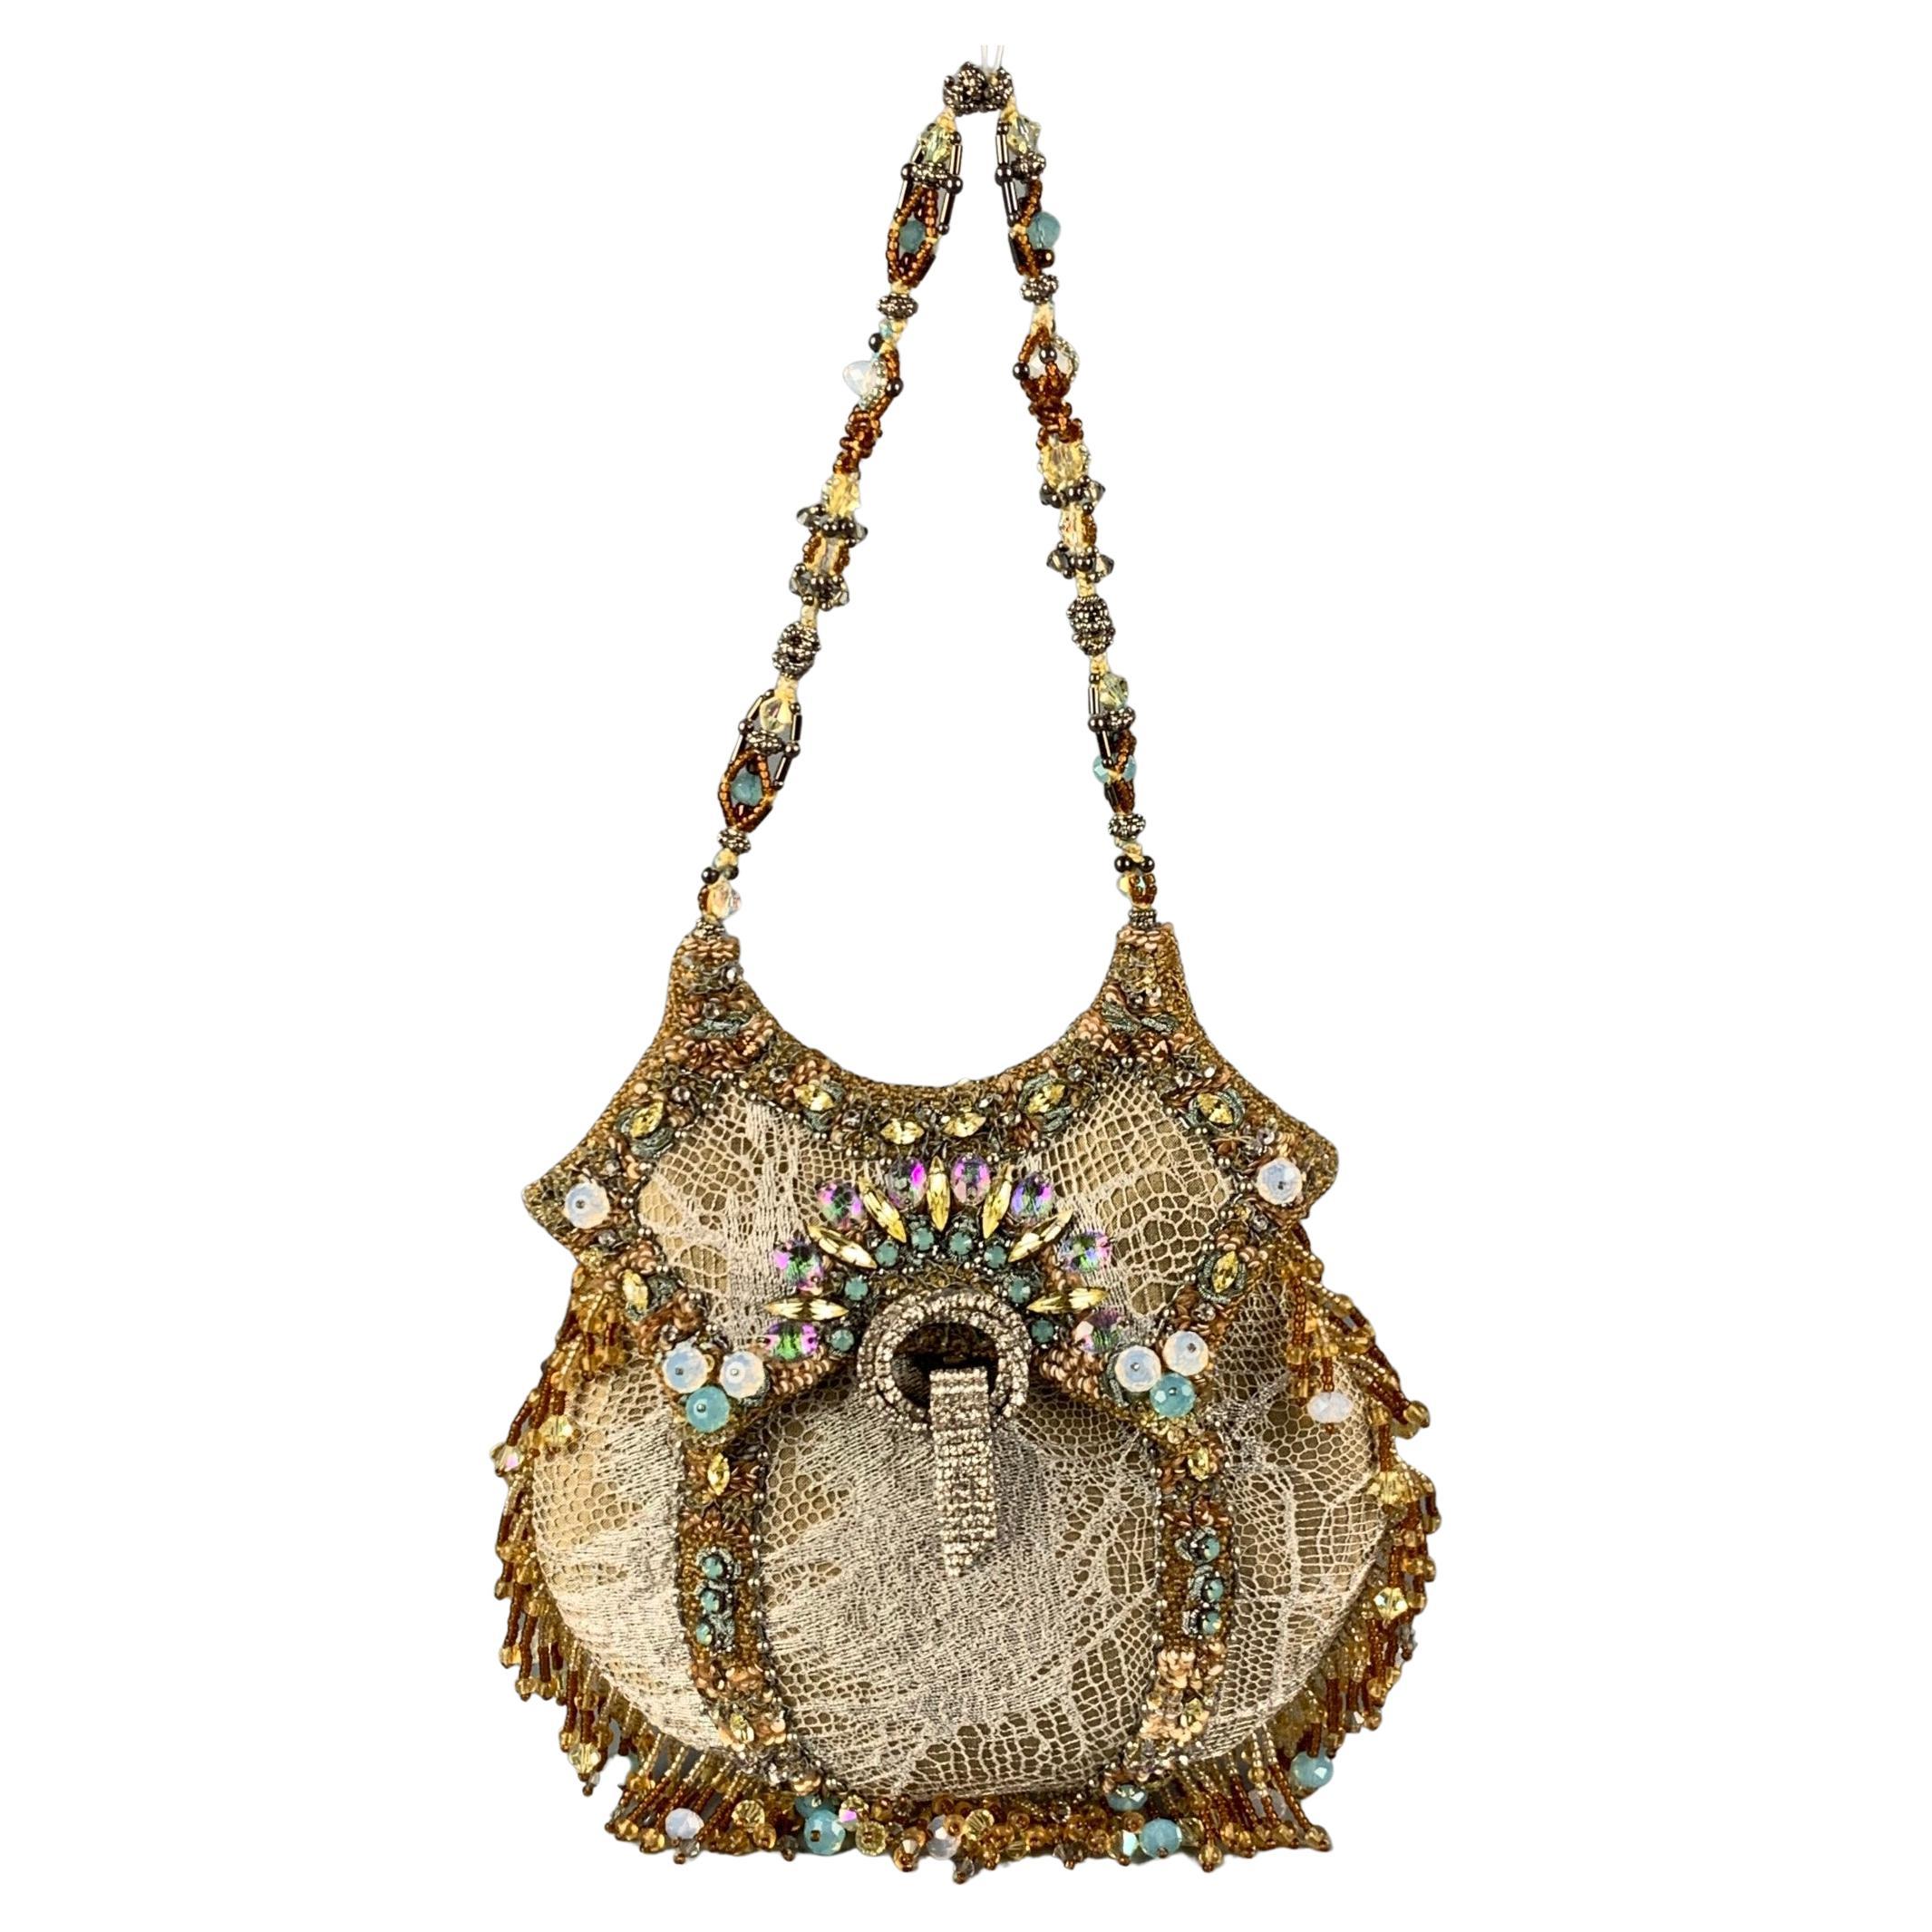 BAGTERIA Moss Silver Beaded Lace Evening Limited Edition Handbag